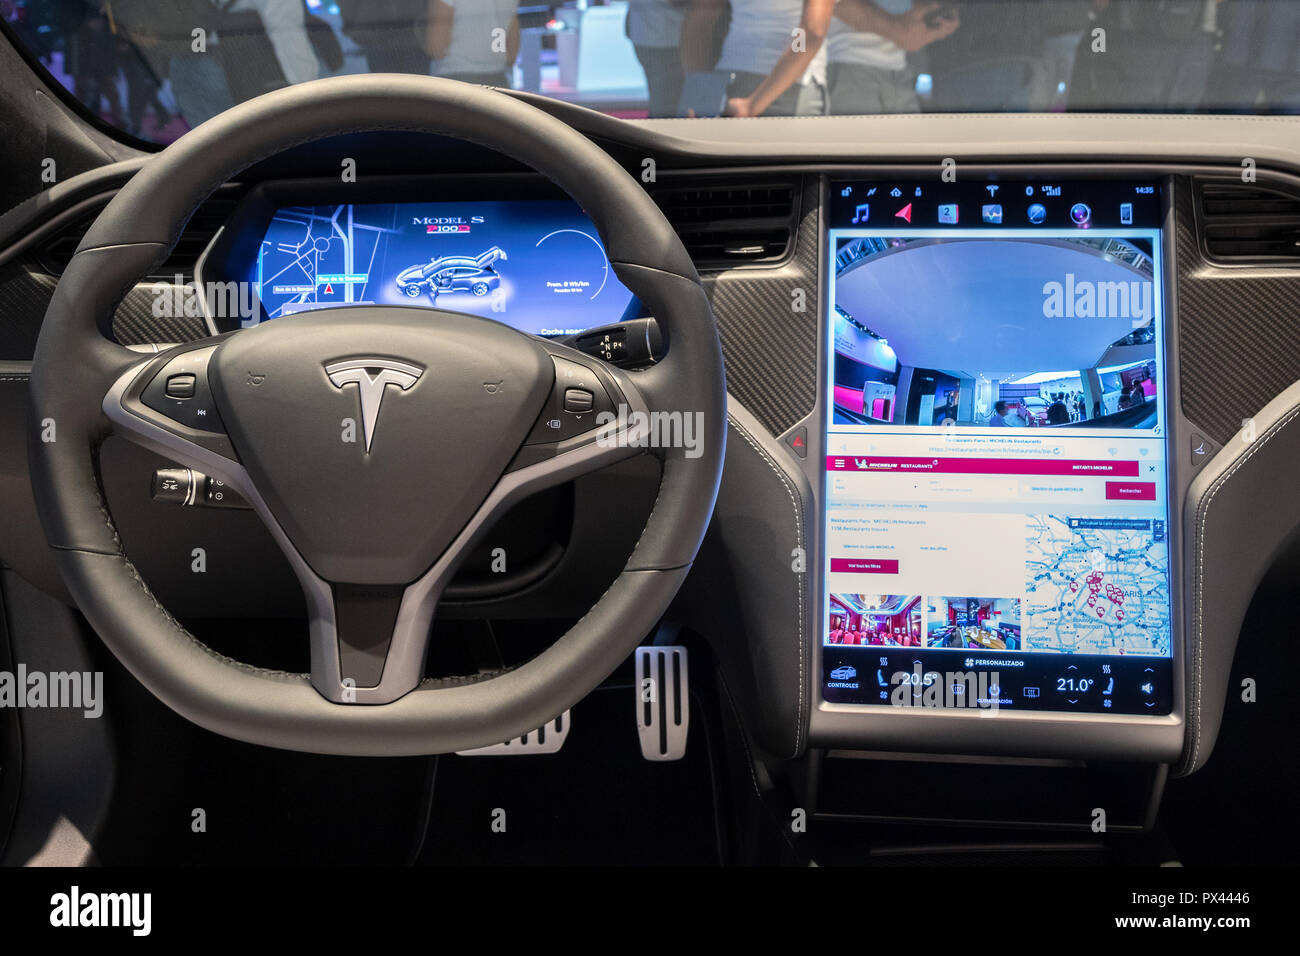 PARIS - OCT 2, 2018: Interior dashboard view of theTesla Model S P100D electric car showcased at the Paris Motor Show. Stock Photo